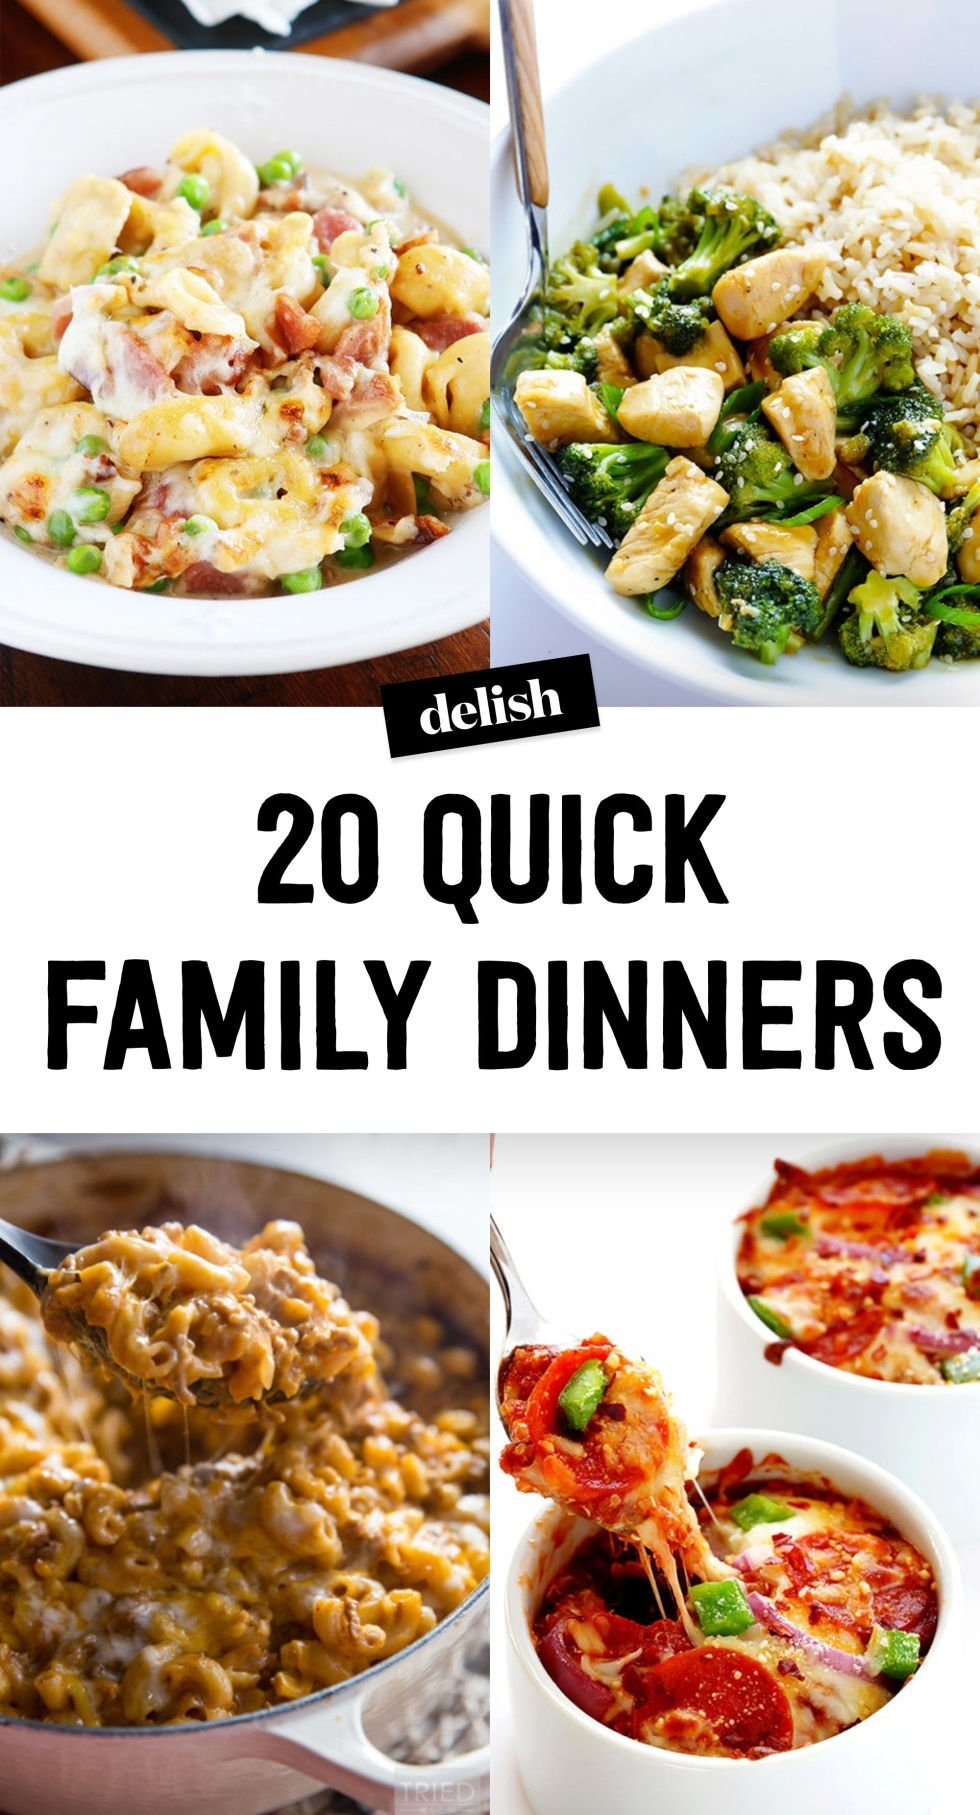 10 Stylish Easy And Quick Dinner Ideas 2022